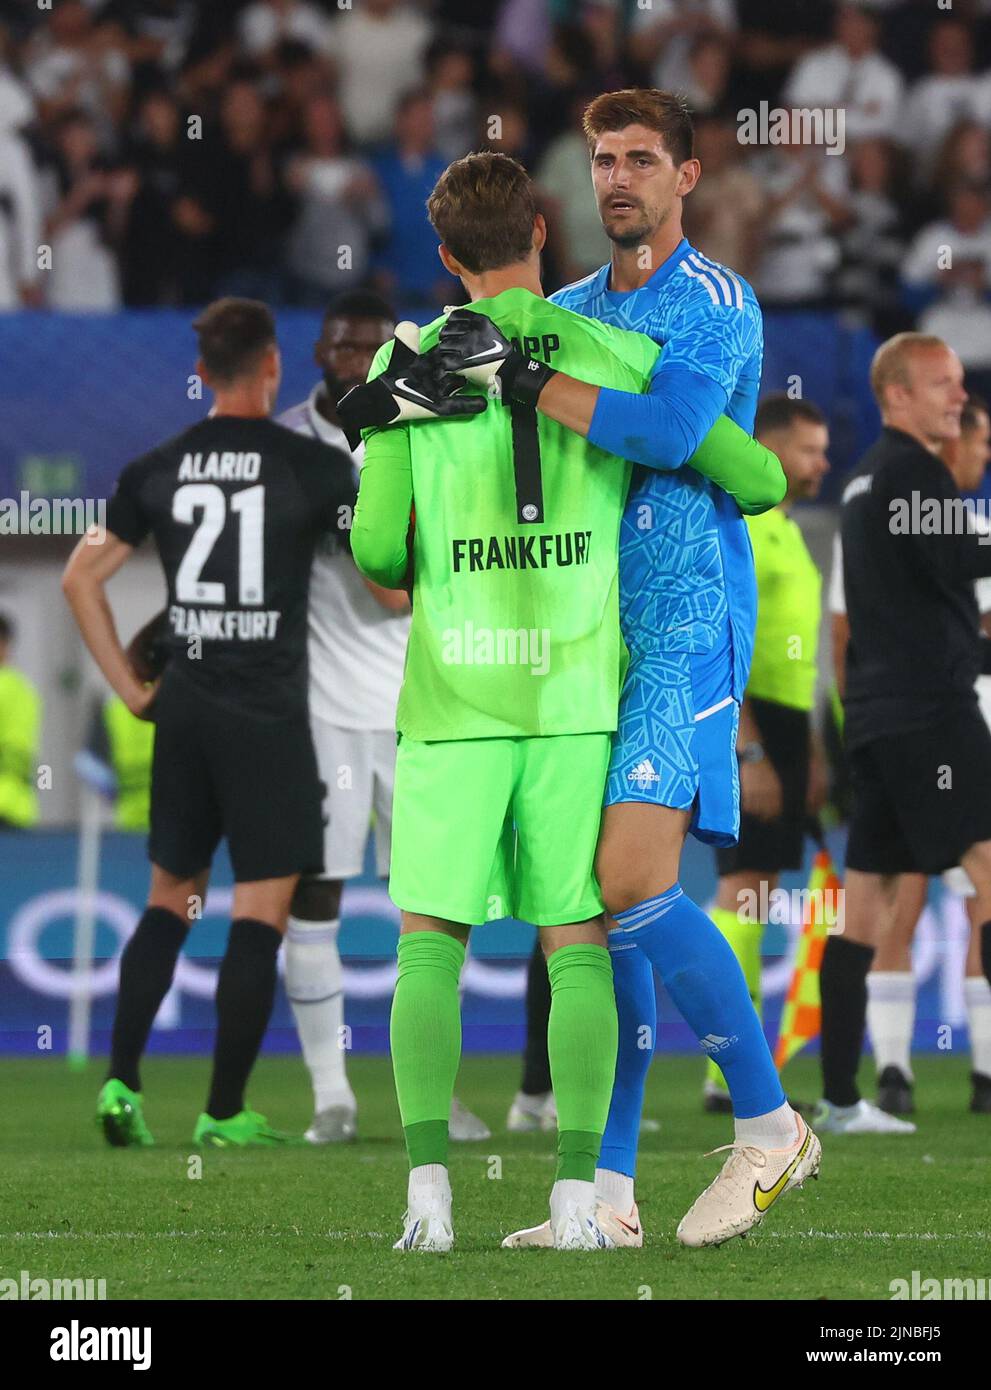 Soccer Football - European Super Cup - Real Madrid v Eintracht Frankfurt - Helsinki Olympic Stadium, Helsinki, Finland - August 10, 2022 Eintracht Frankfurt's Kevin Trapp and Real Madrid's Thibaut Courtois after the match REUTERS/Kai Pfaffenbach Stock Photo